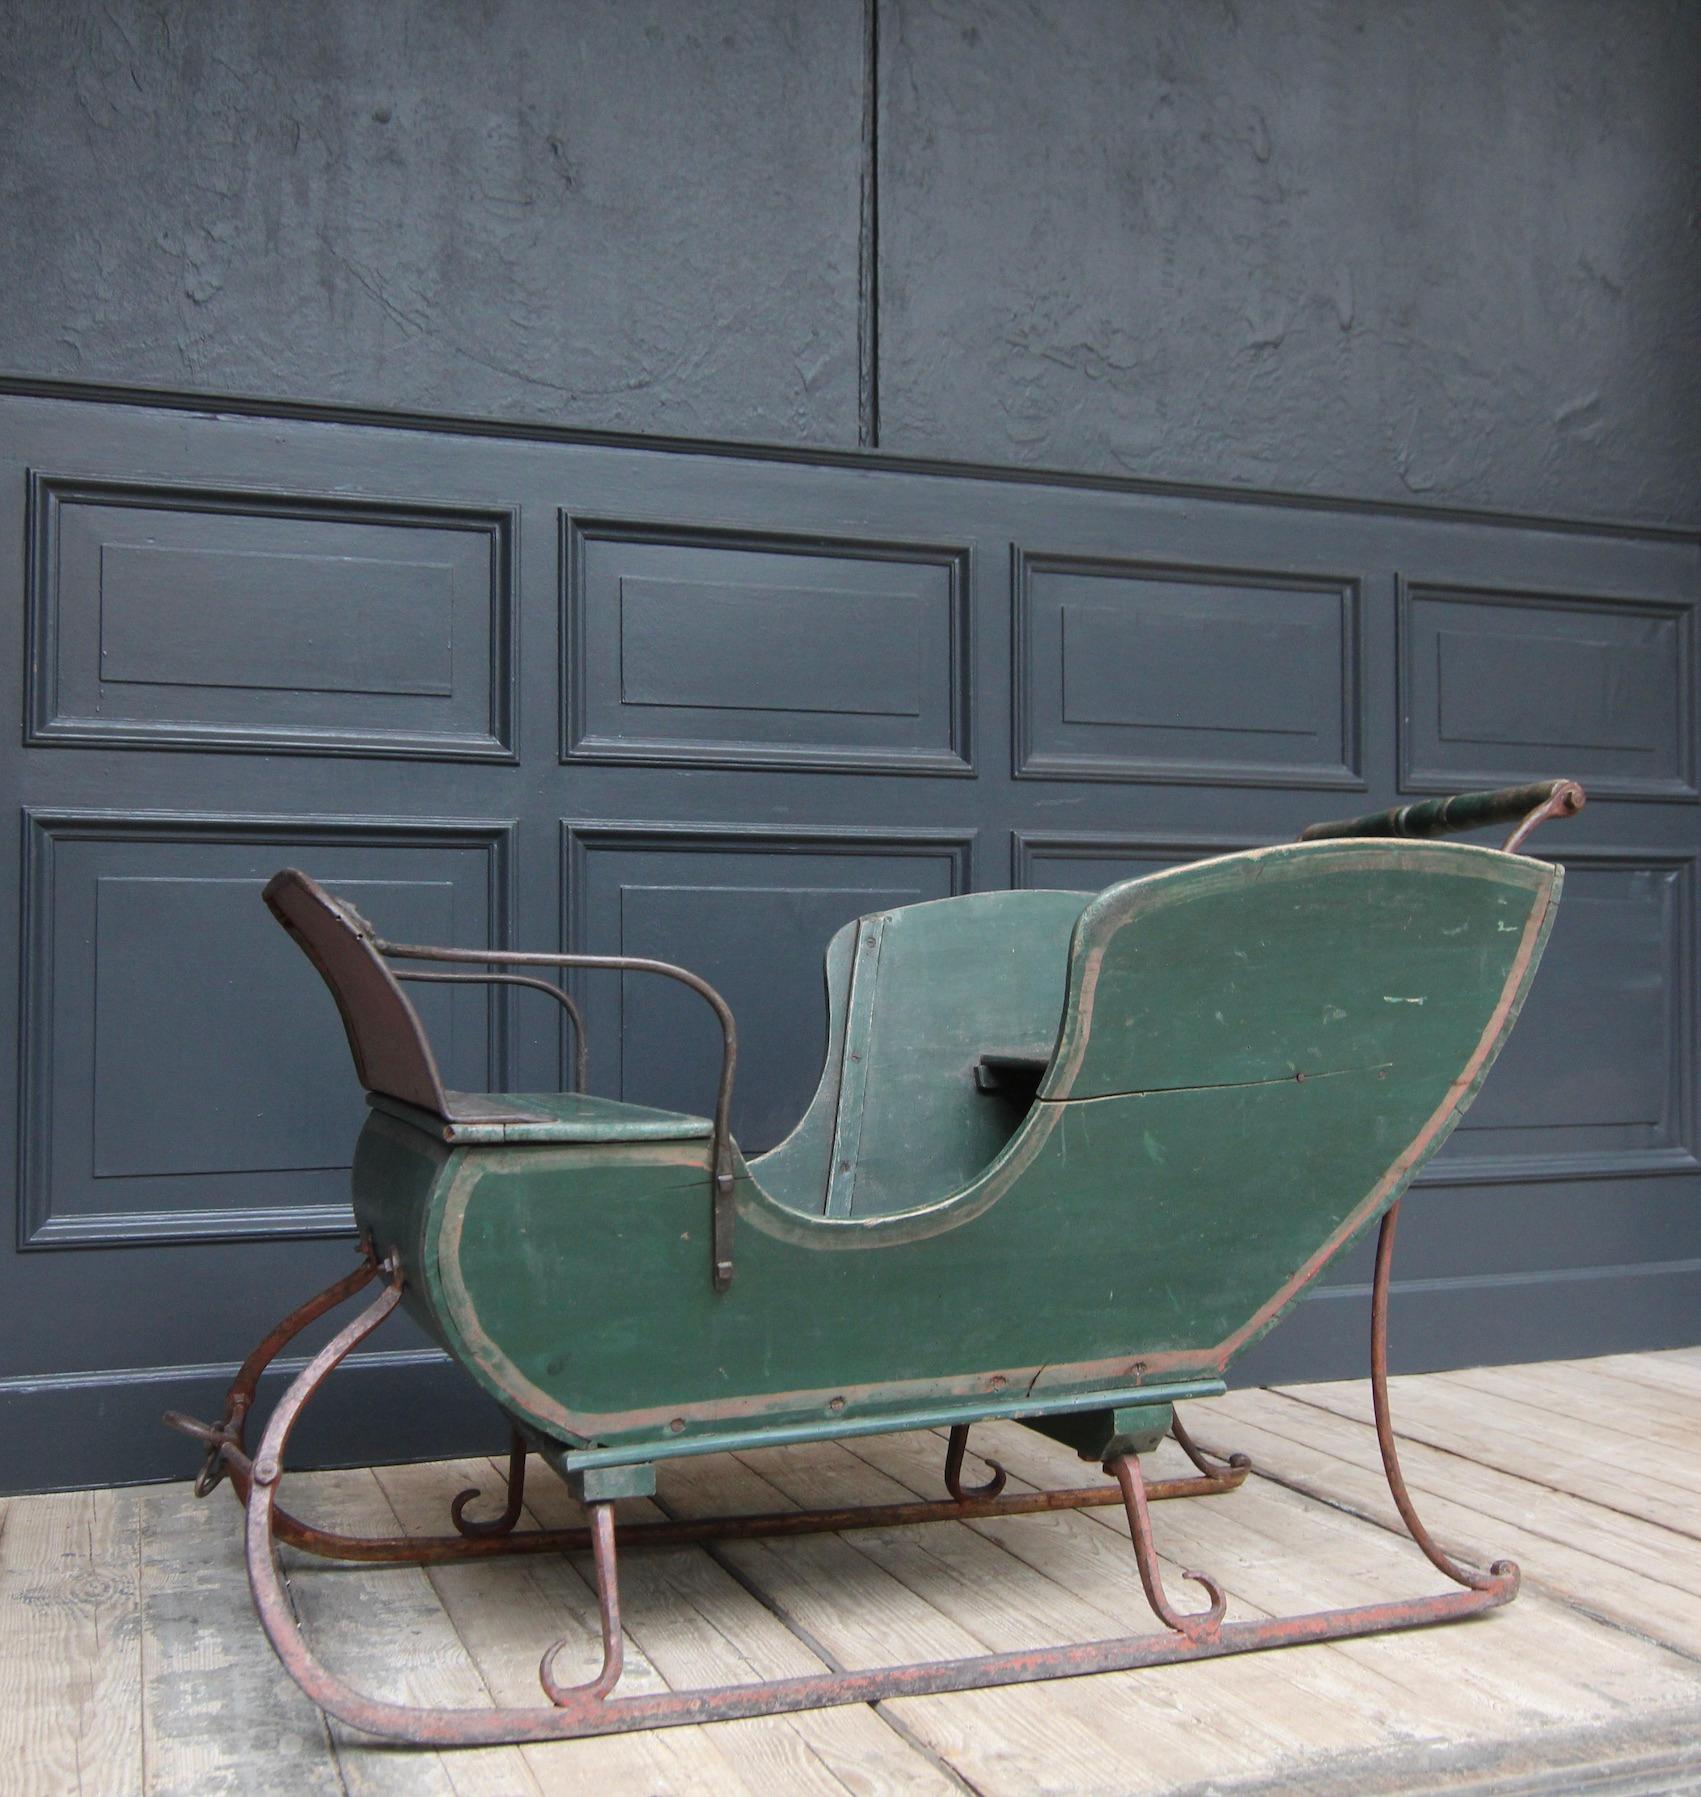 Early 20th Century German Children's Sledge In Good Condition For Sale In Dusseldorf, DE